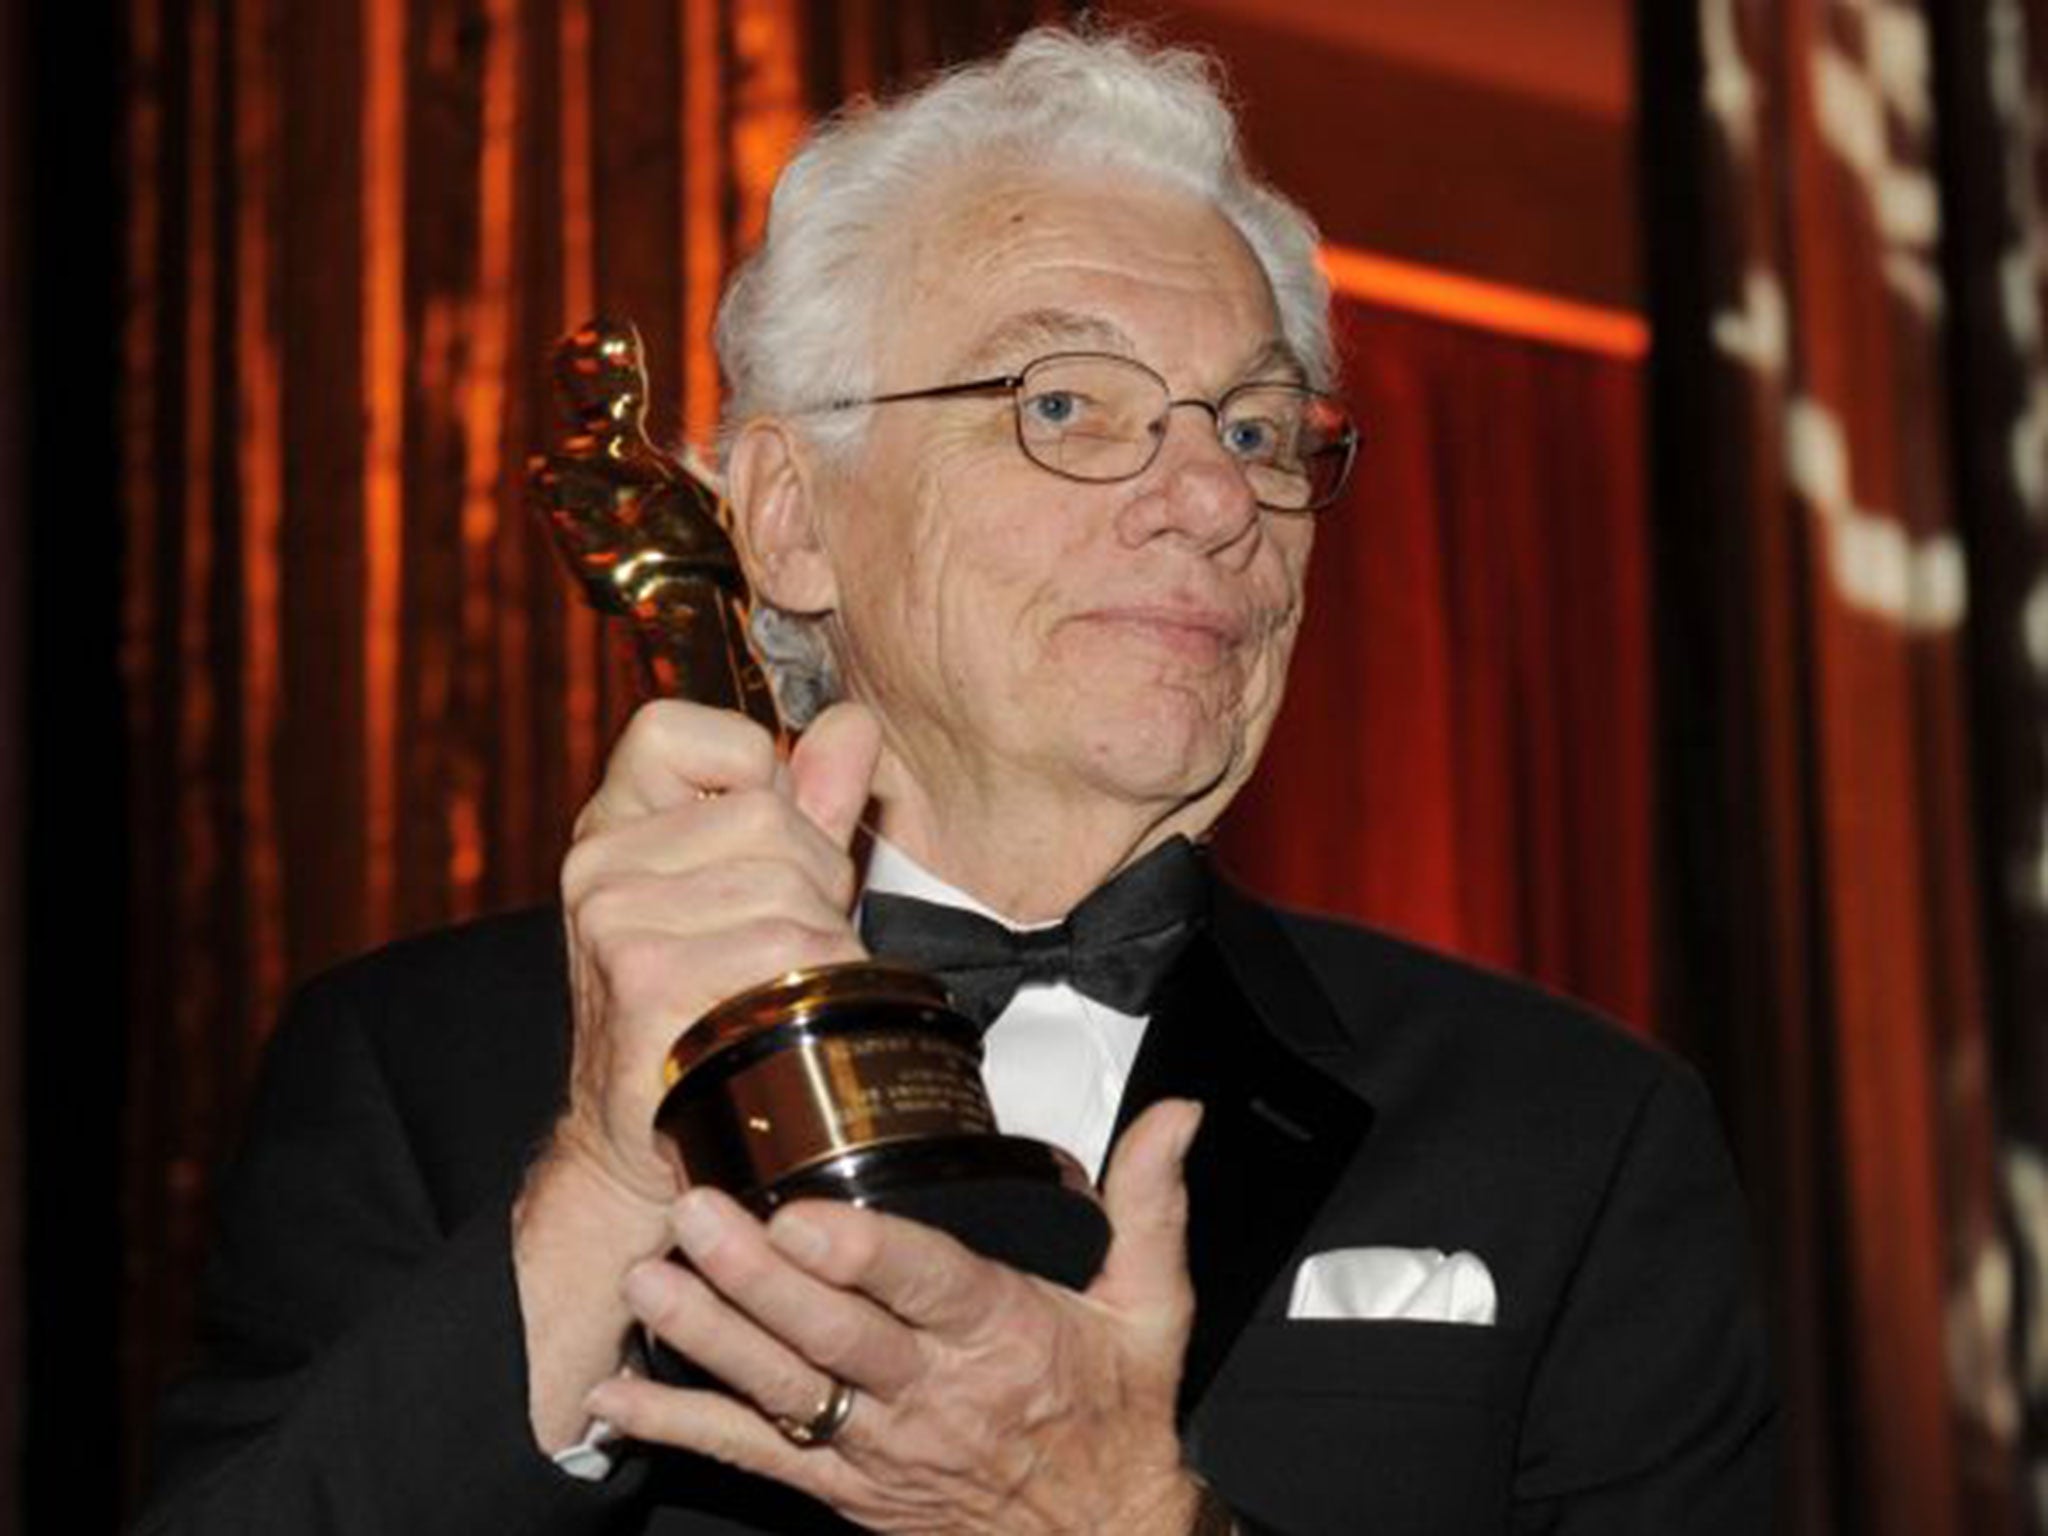 The cinematographer was bestowed with an honorary Oscar in 2009